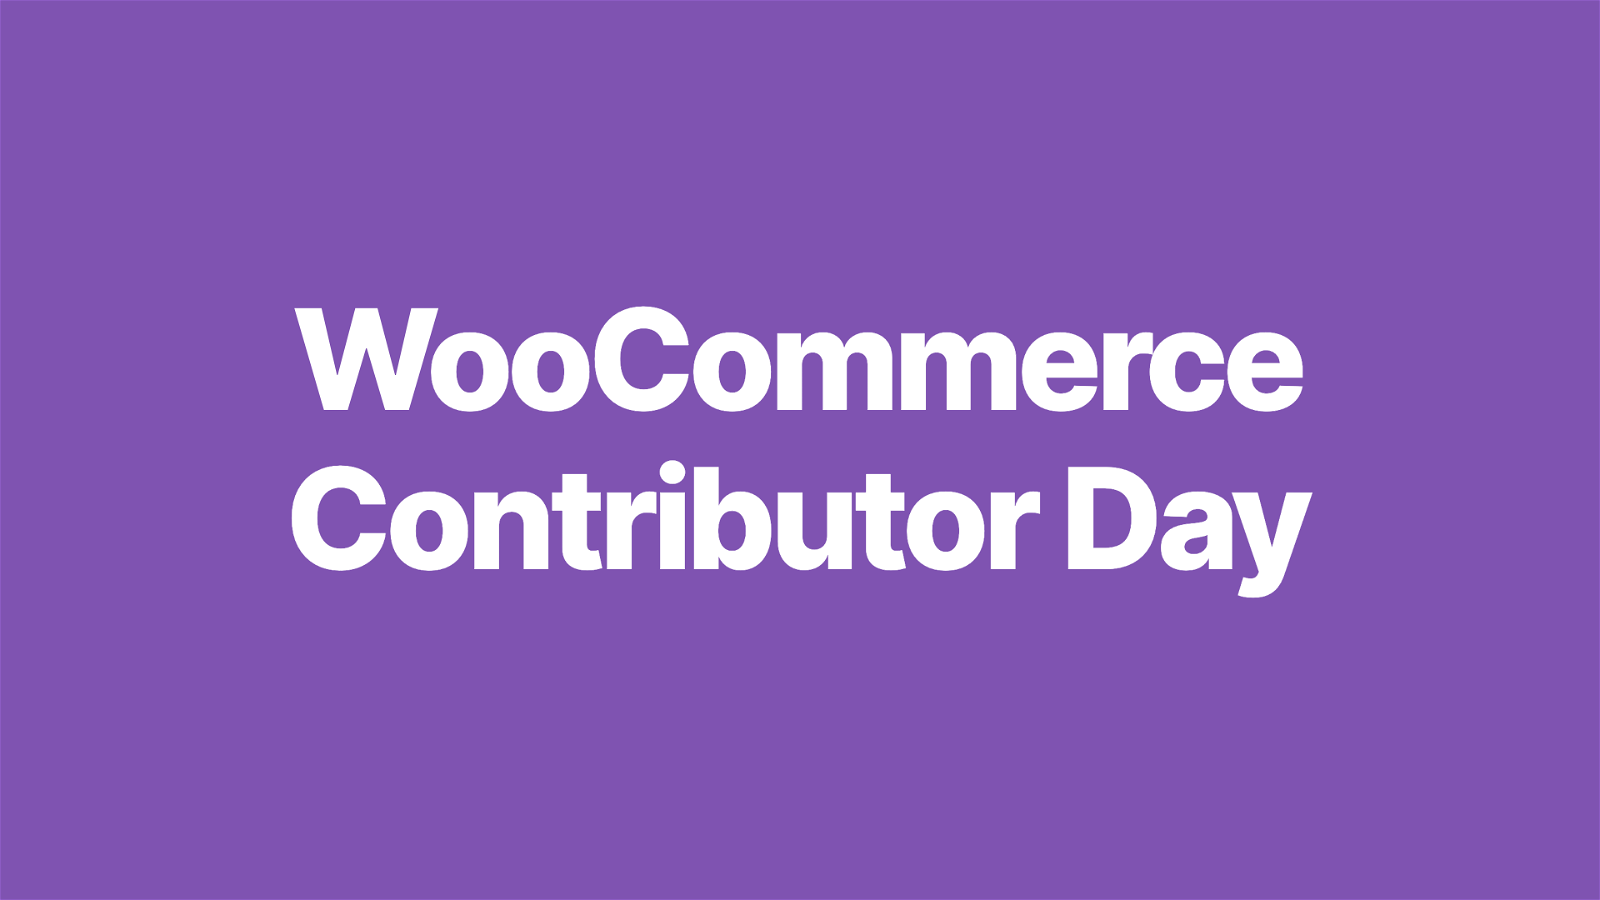 WooCommerce Contributor Day